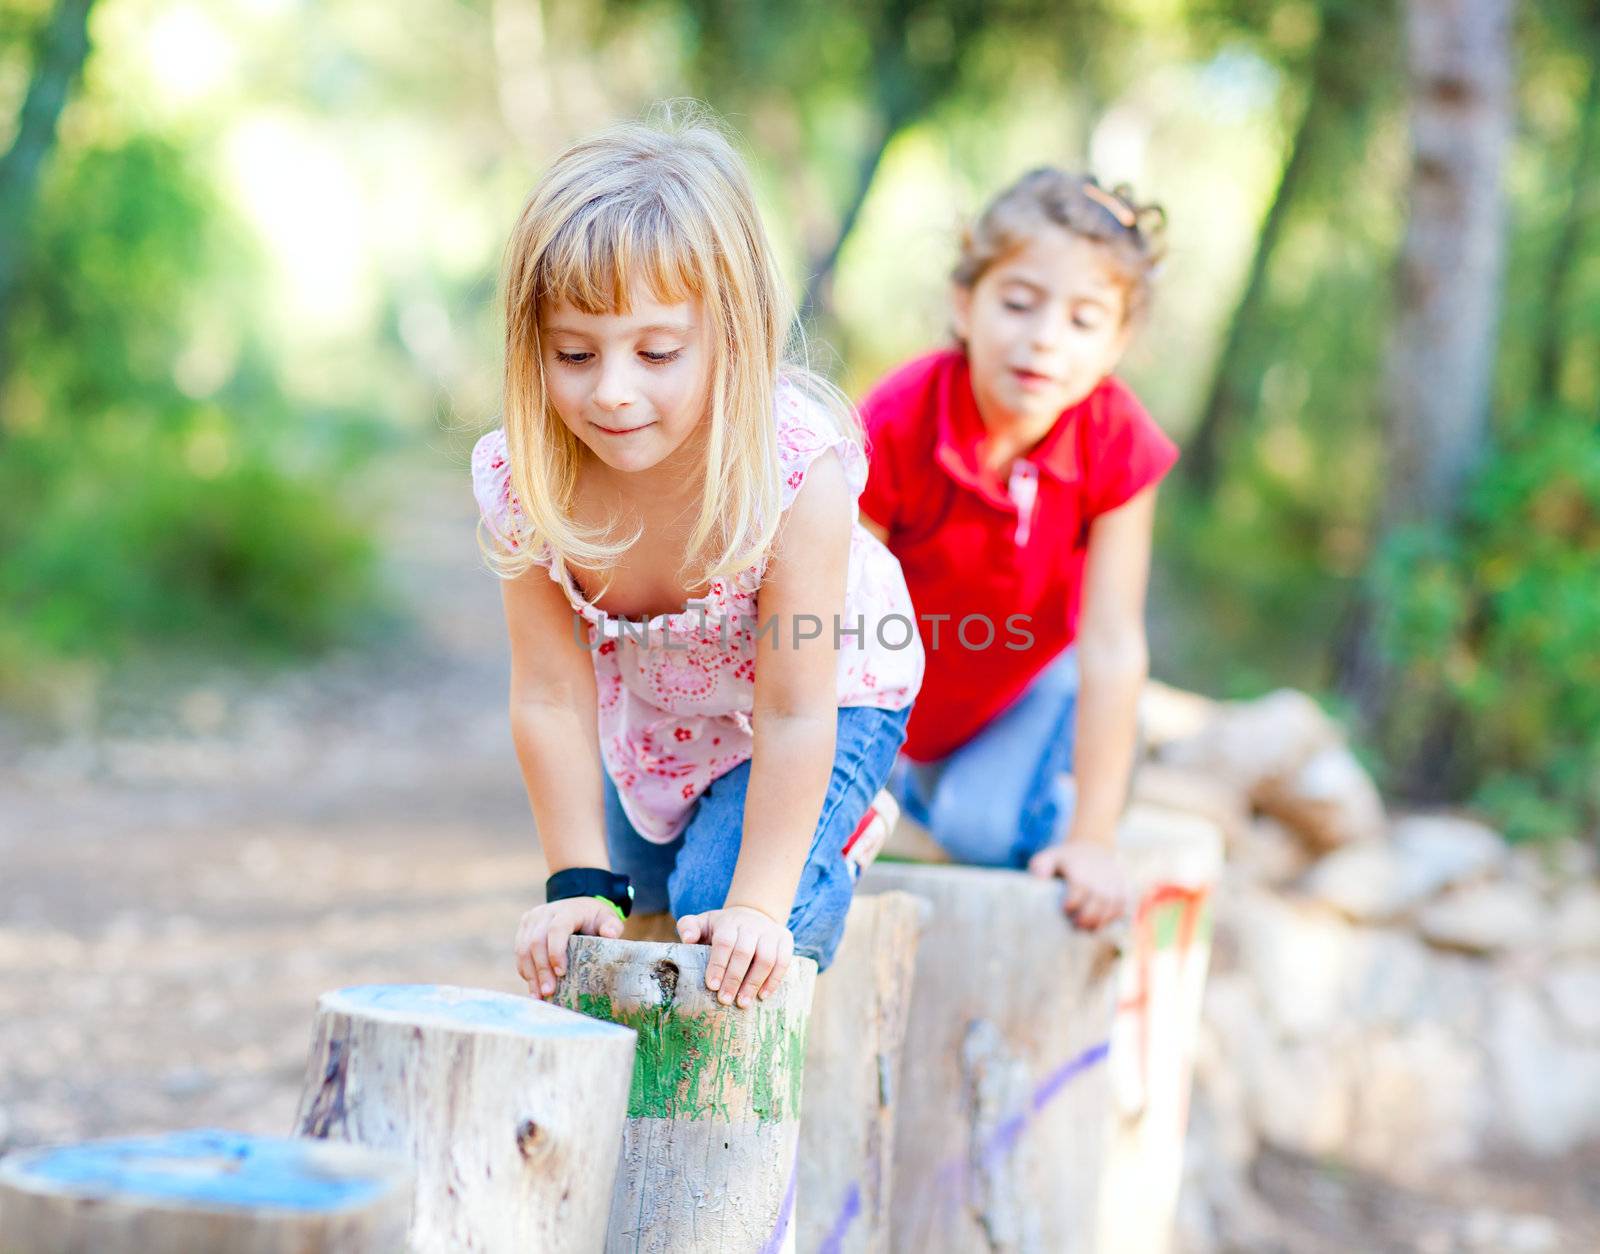 kid girls playing on trunks in forest nature by lunamarina